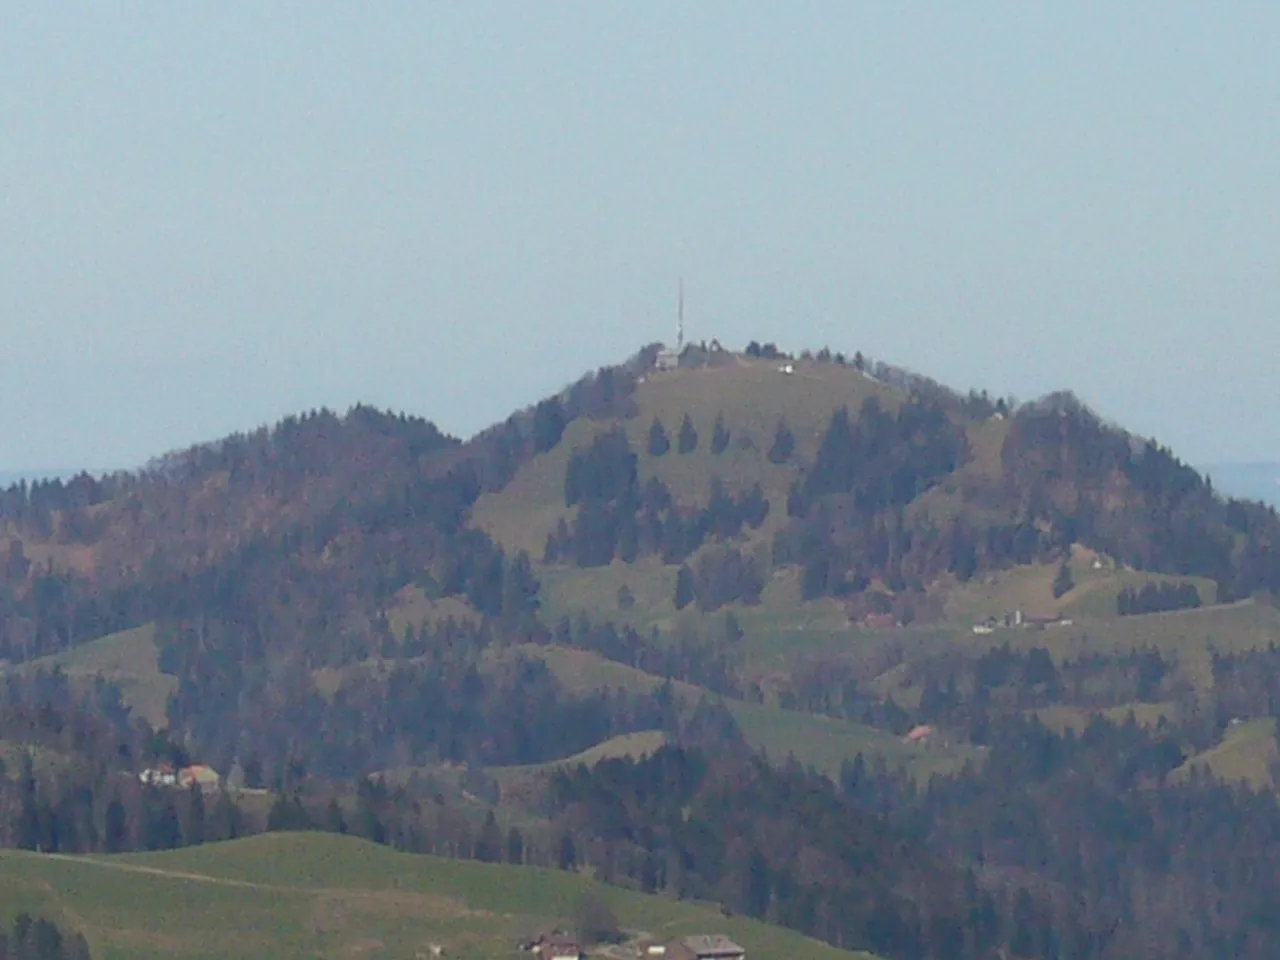 Photo showing: Mountain Hörnli (1133 m), canton of Zurich, Switzerland.

Picture taken from the top of the mountain Bachtel by Peter Berger. March 4, 2007.